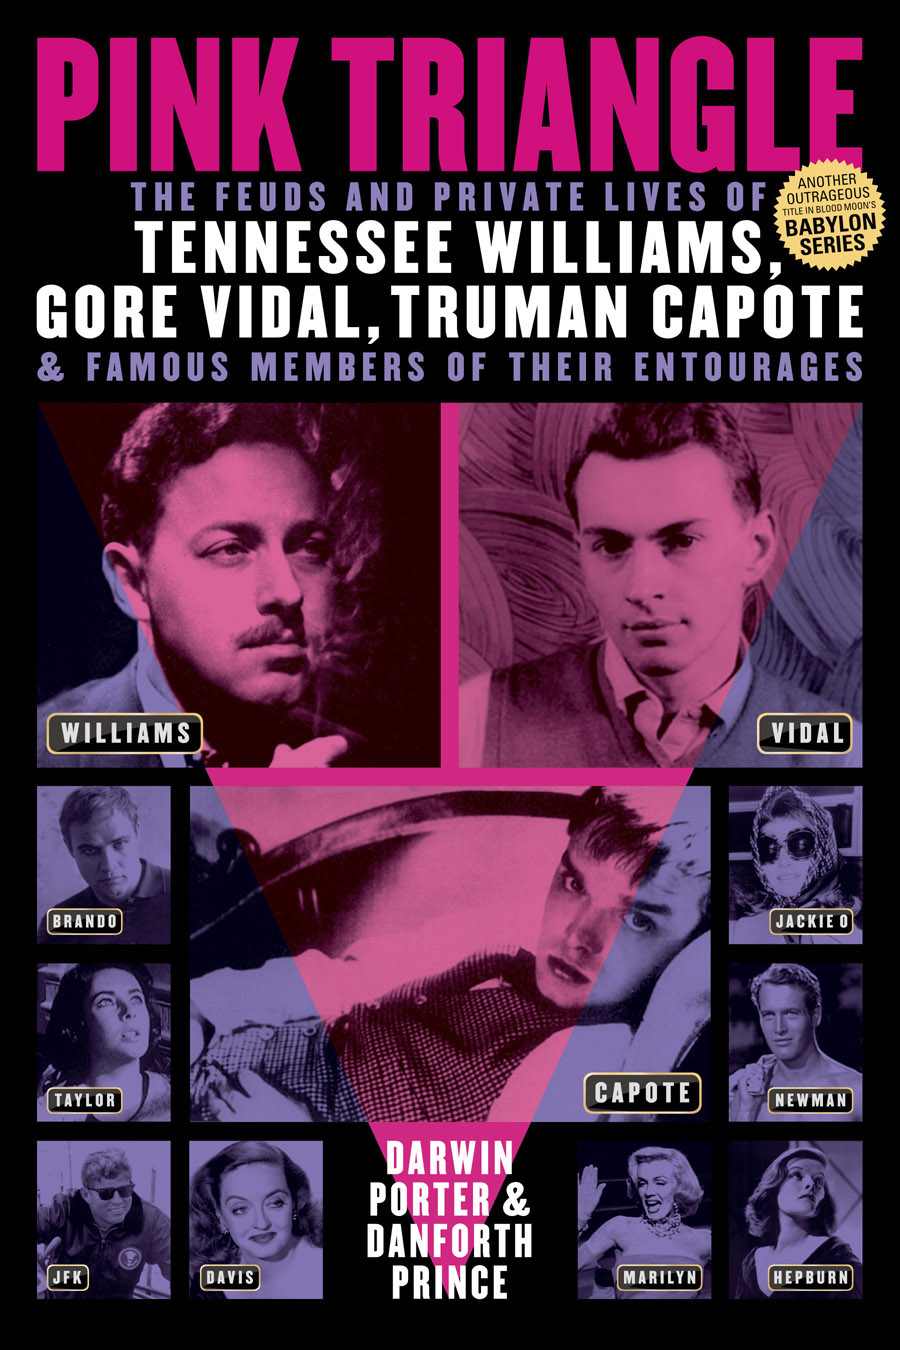 Pink Triangle: The Feuds and Private Lives of Tennessee Williams, Gore Vidal, Truman Capote, and Famous Members of Their Entourages (Blood Moon's Babylon Series)